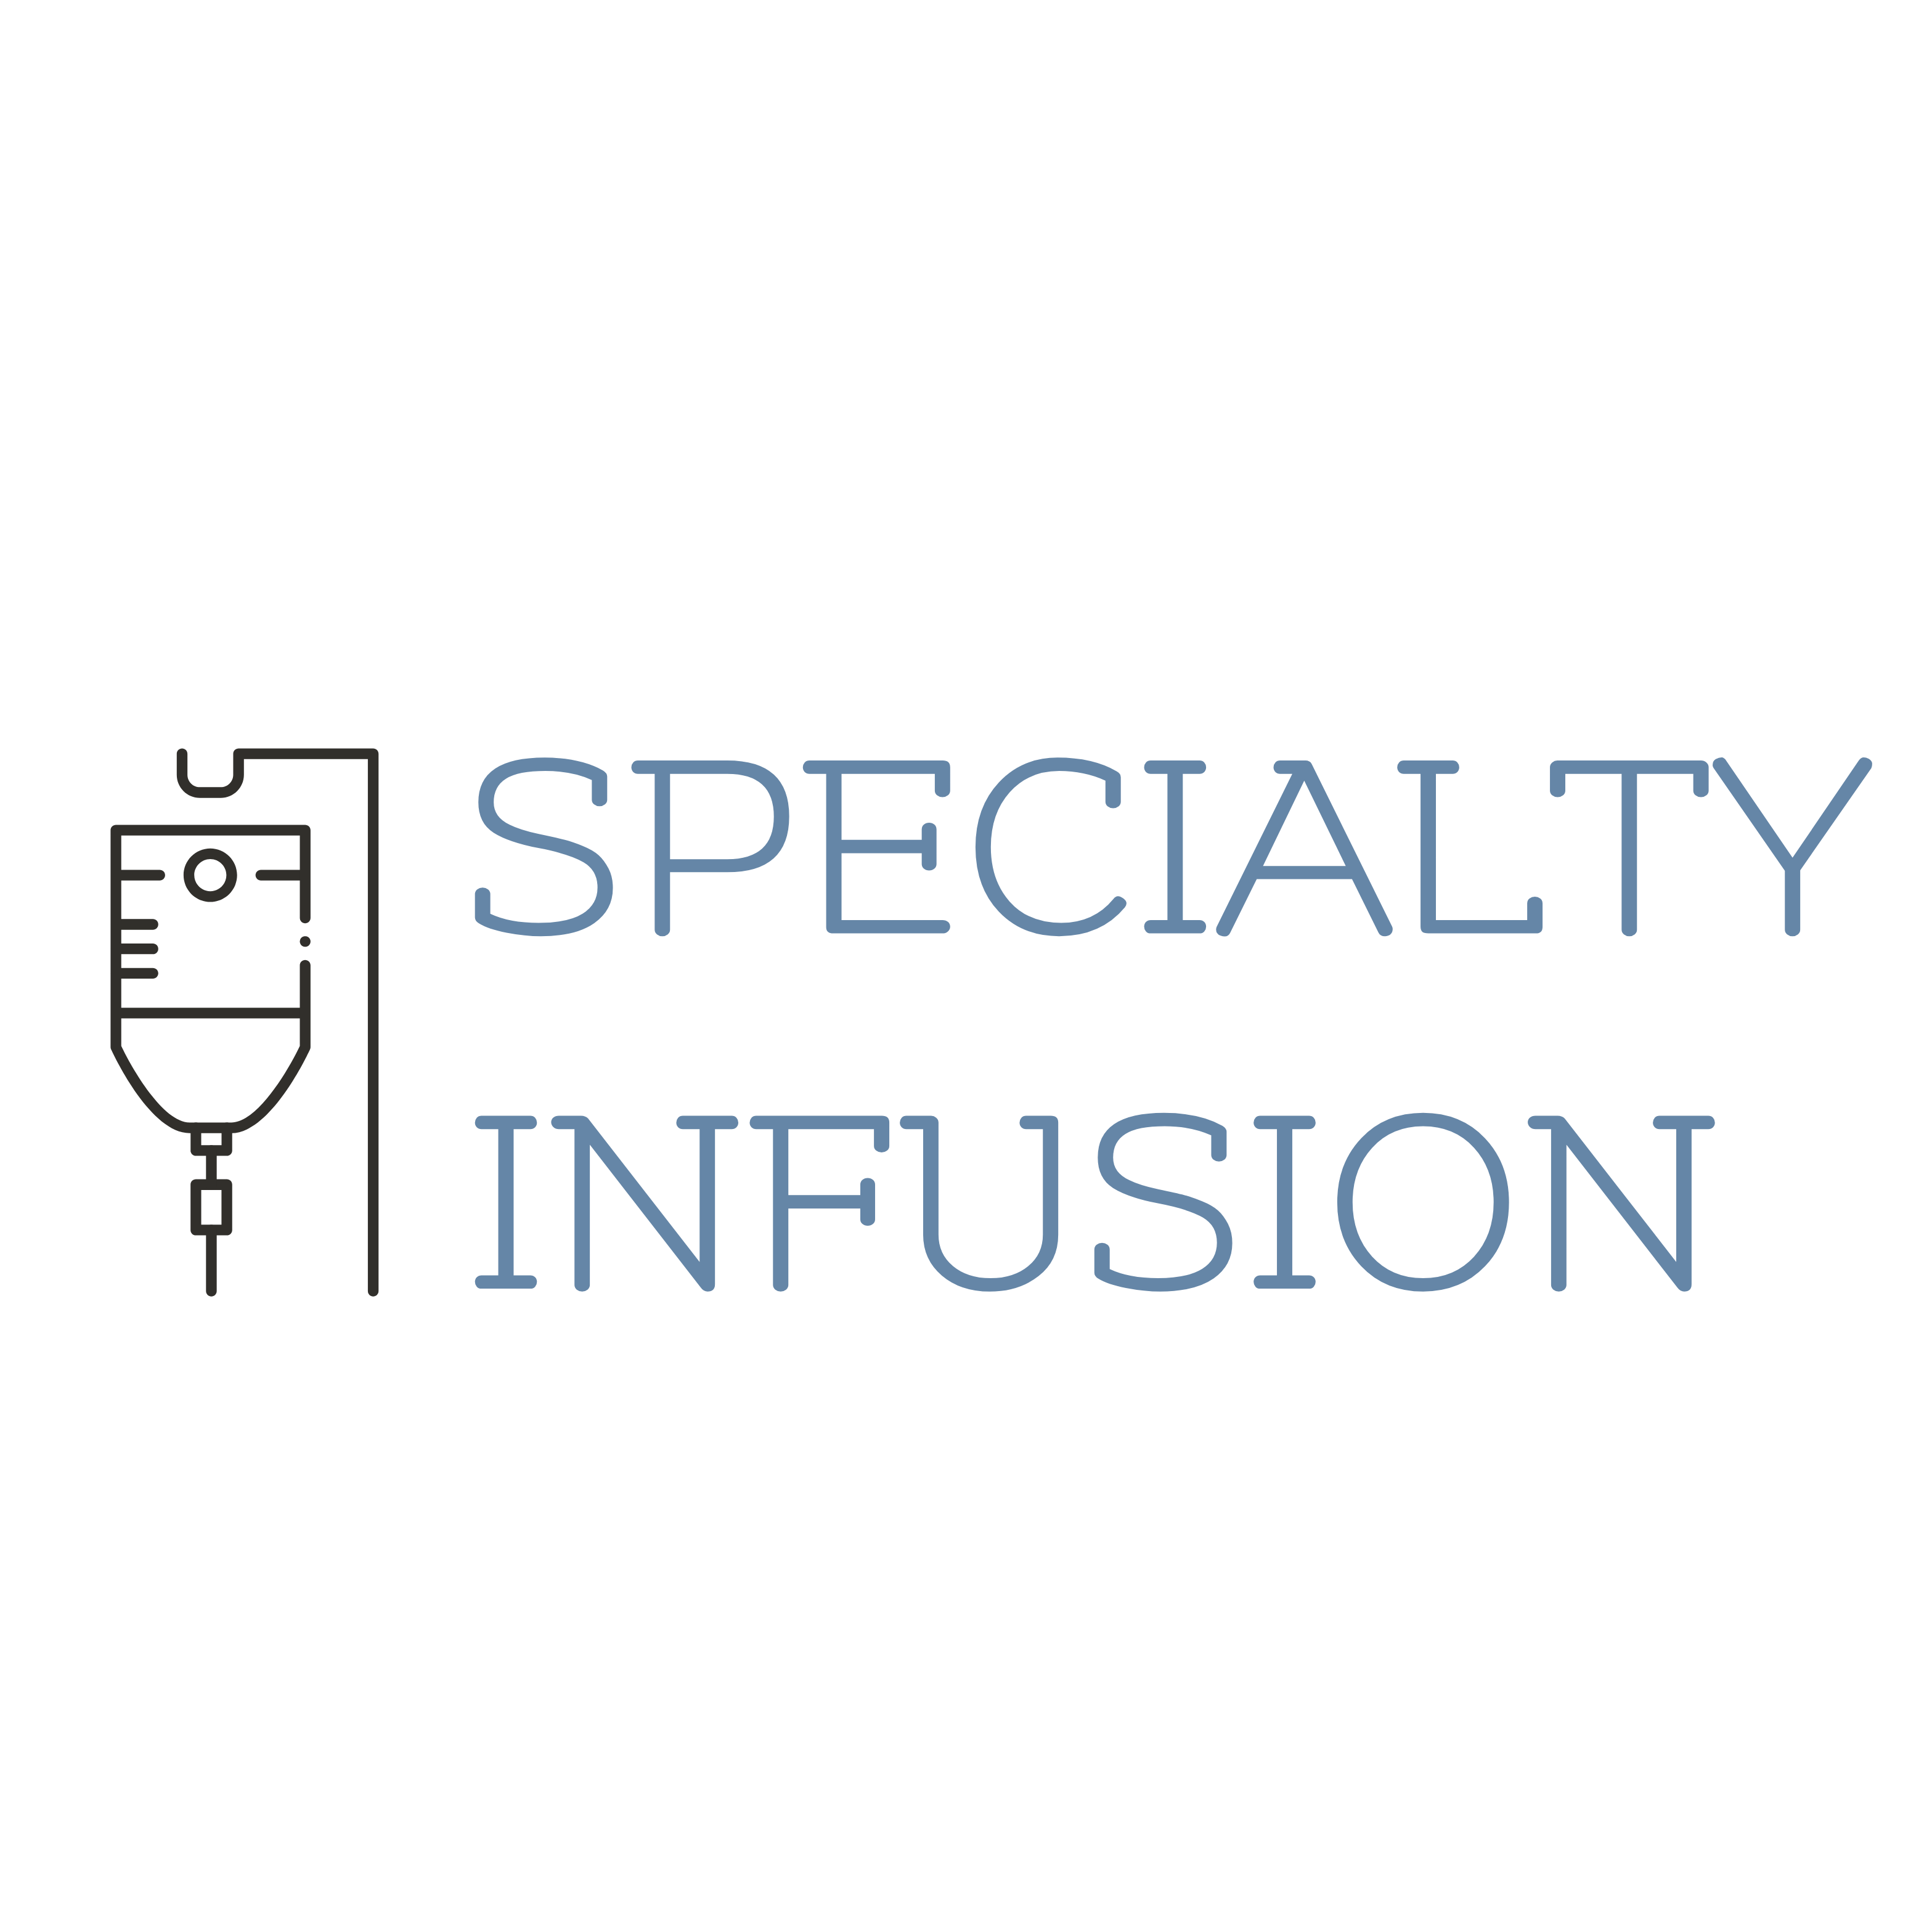 Specialty Infusion Logo